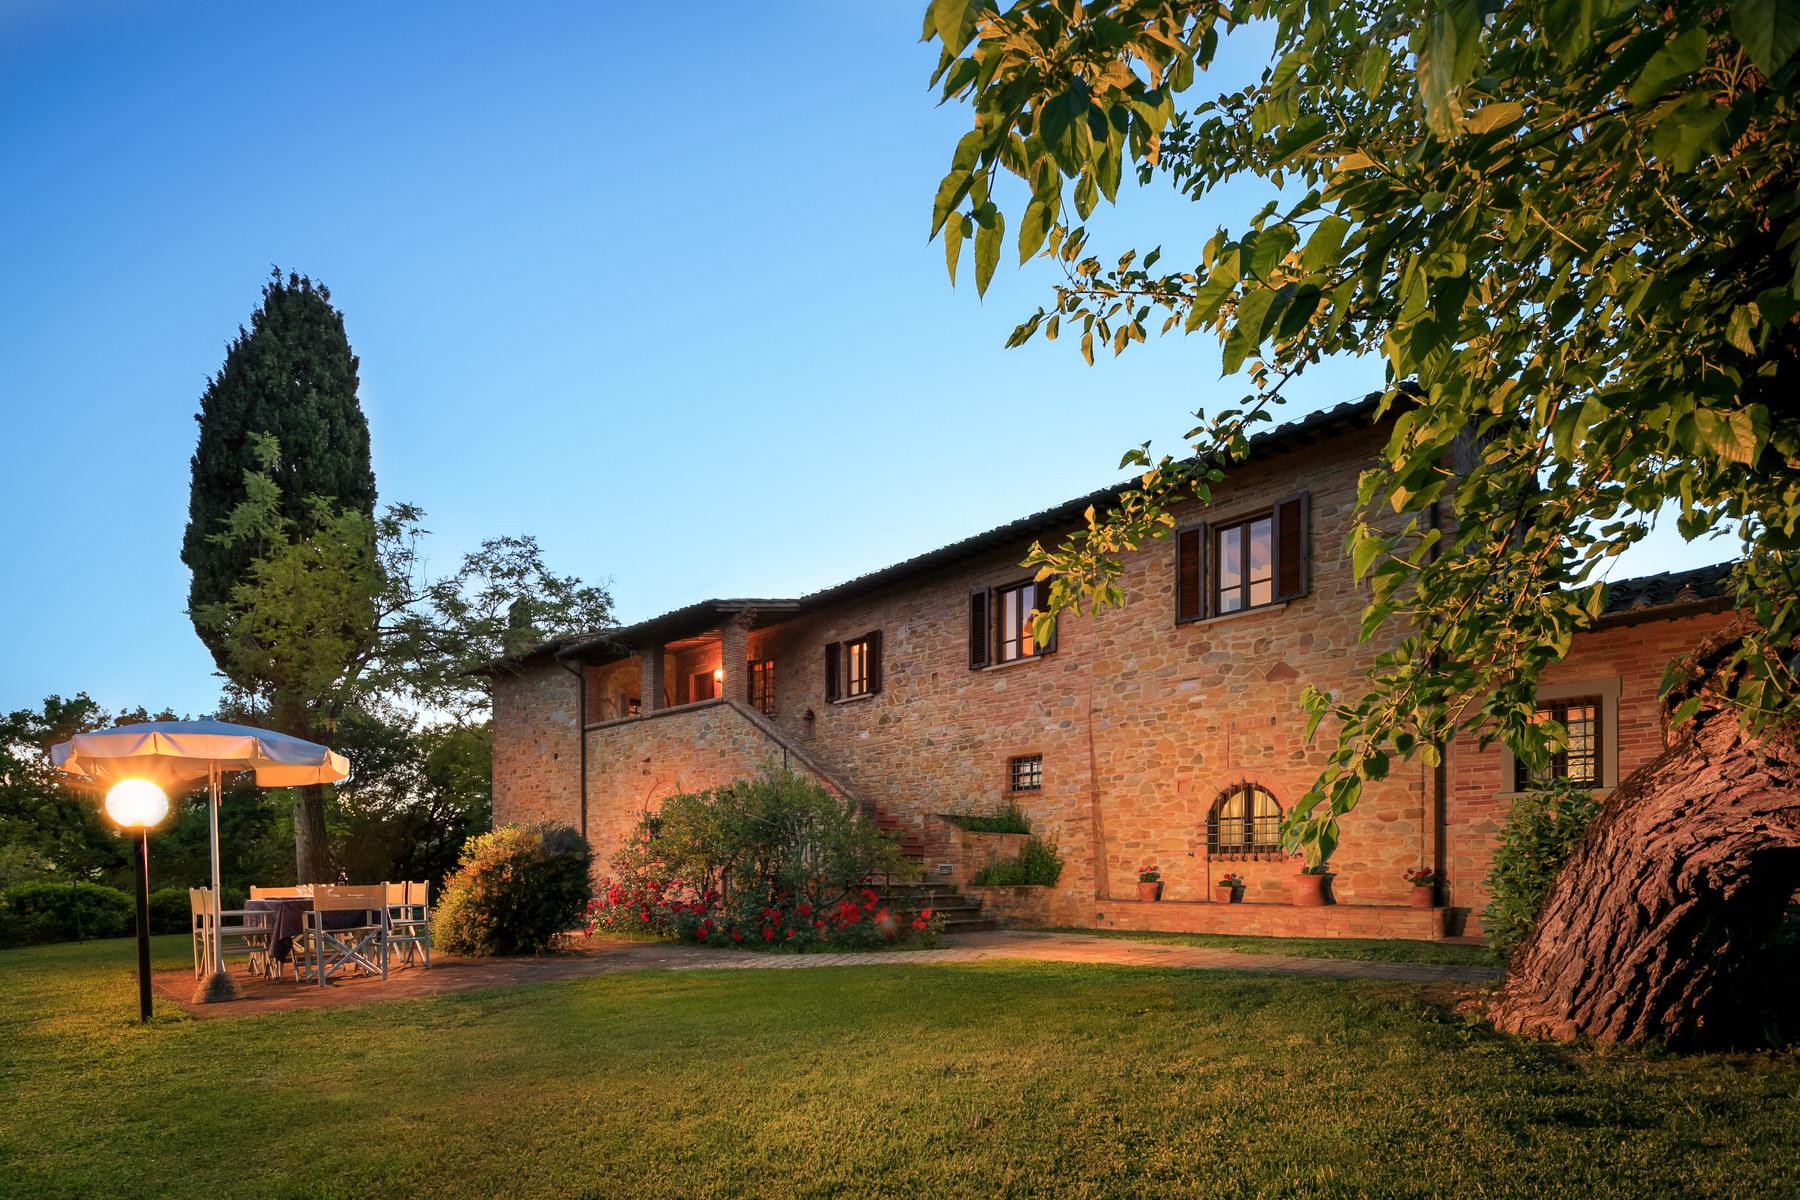 Wonderful countryhouse in the tuscan countryside - 3